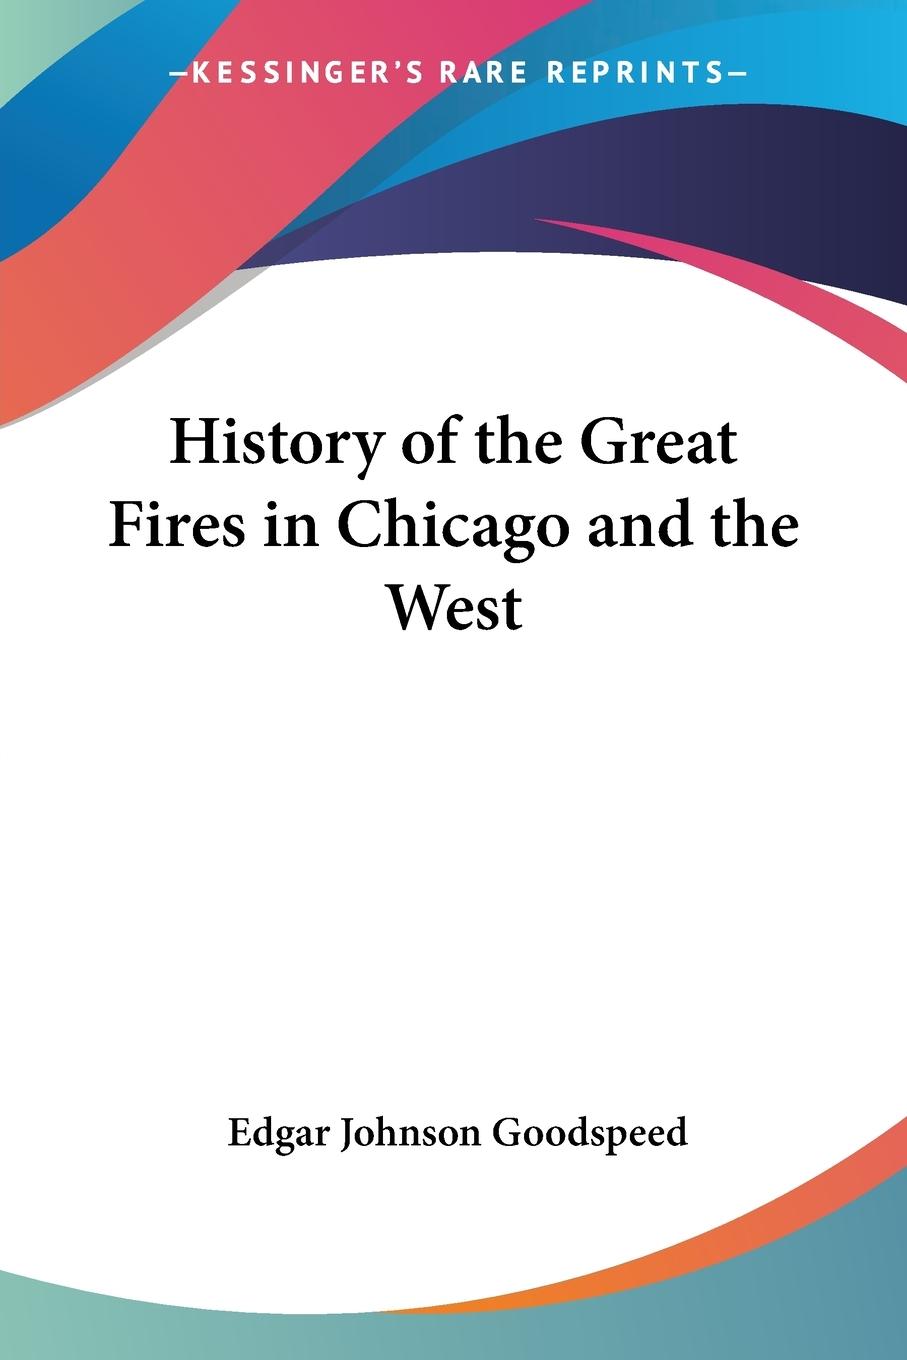 History of the Great Fires in Chicago and the West - Goodspeed, Edgar Johnson